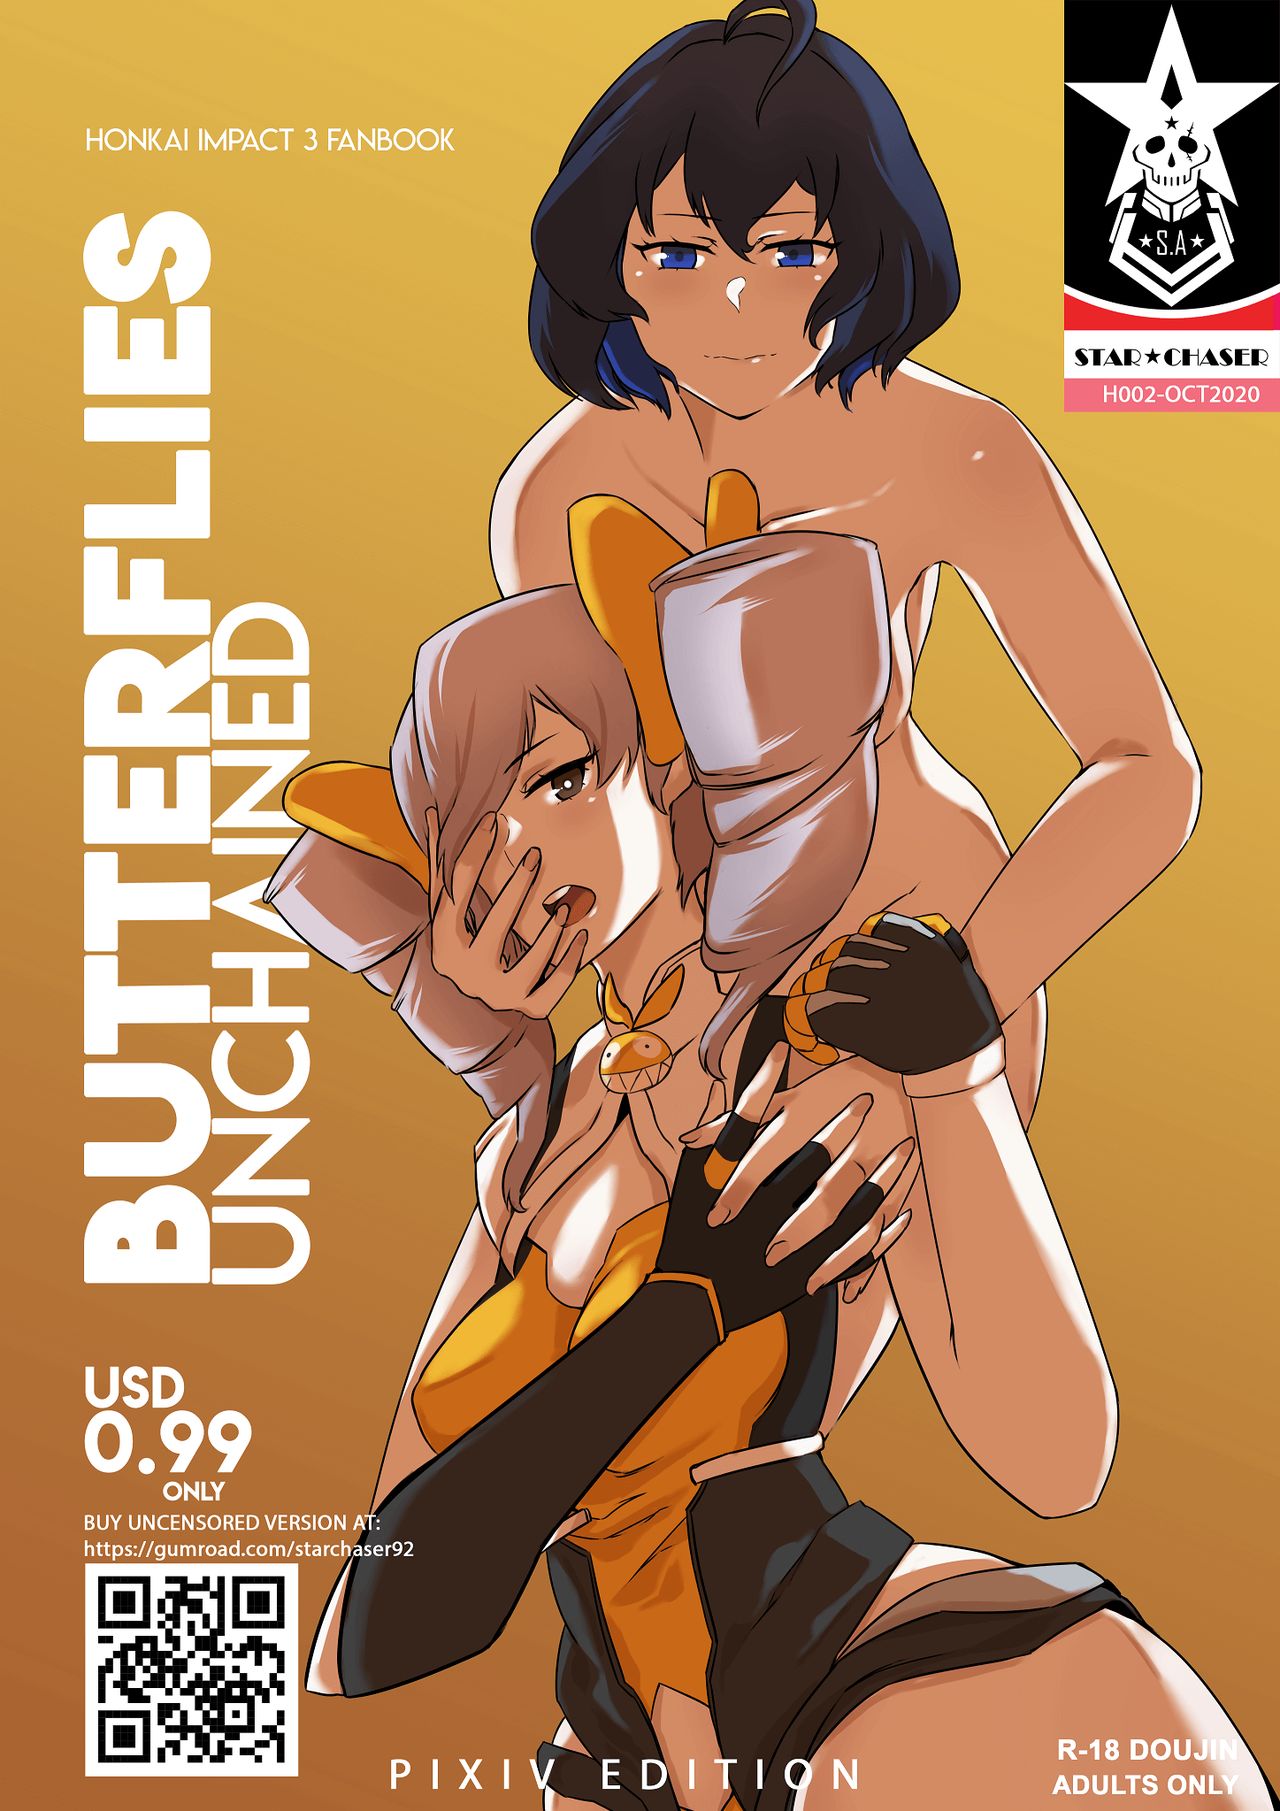 Read Star Chaser Hi3rd Doujinshi 002 Butterflies Unchained Pixiv Edition Hentai Porns Manga And Porncomics Xxx